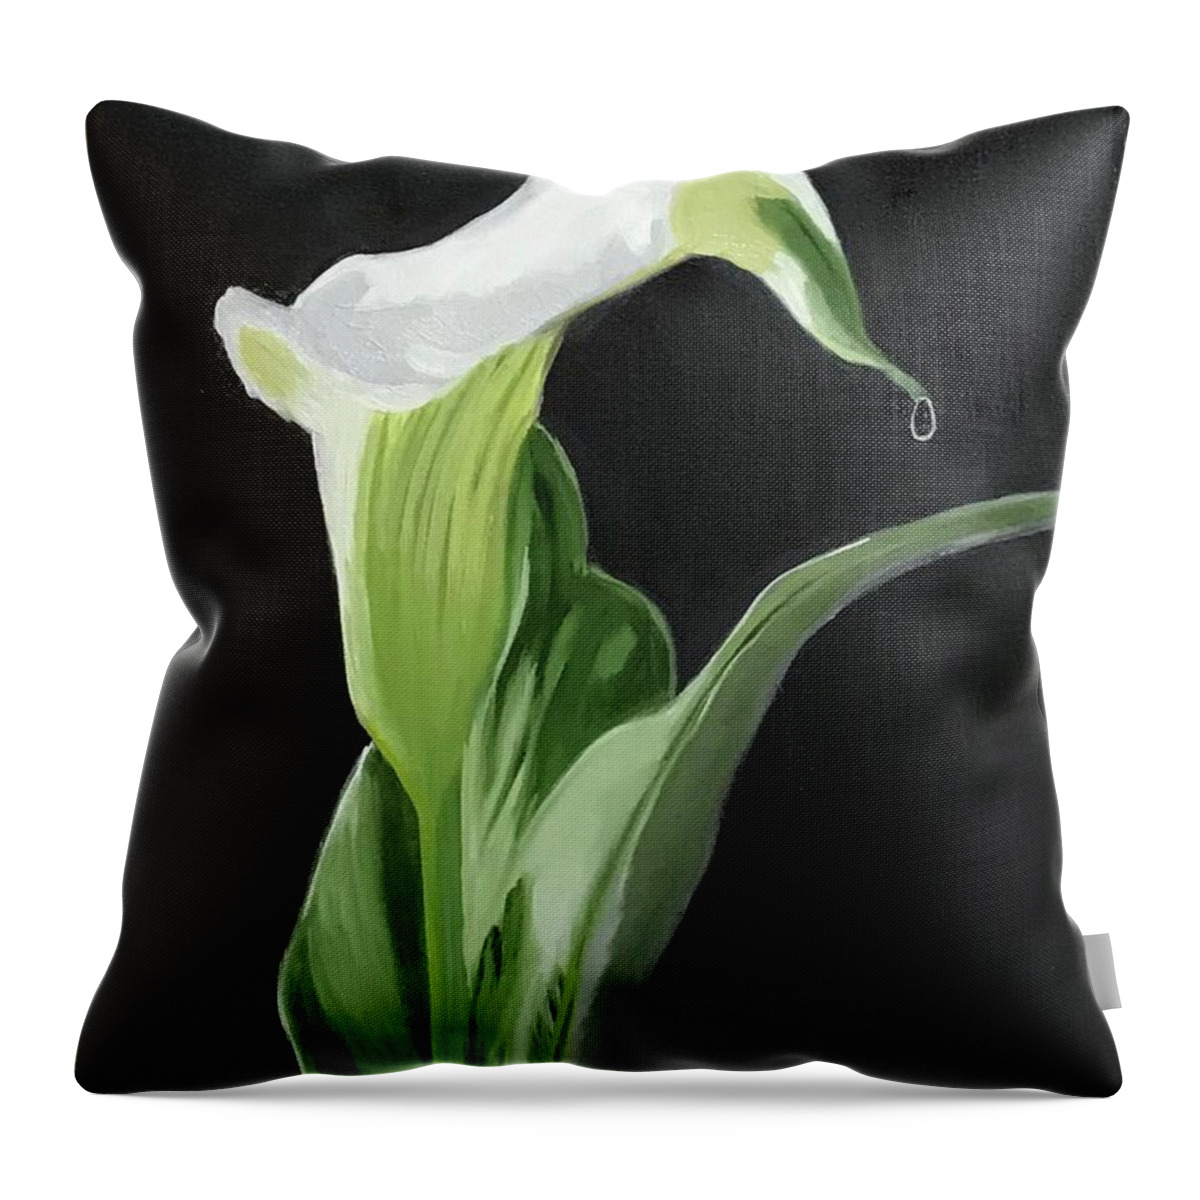 Original Art Work Throw Pillow featuring the painting Calla Lily by Theresa Honeycheck